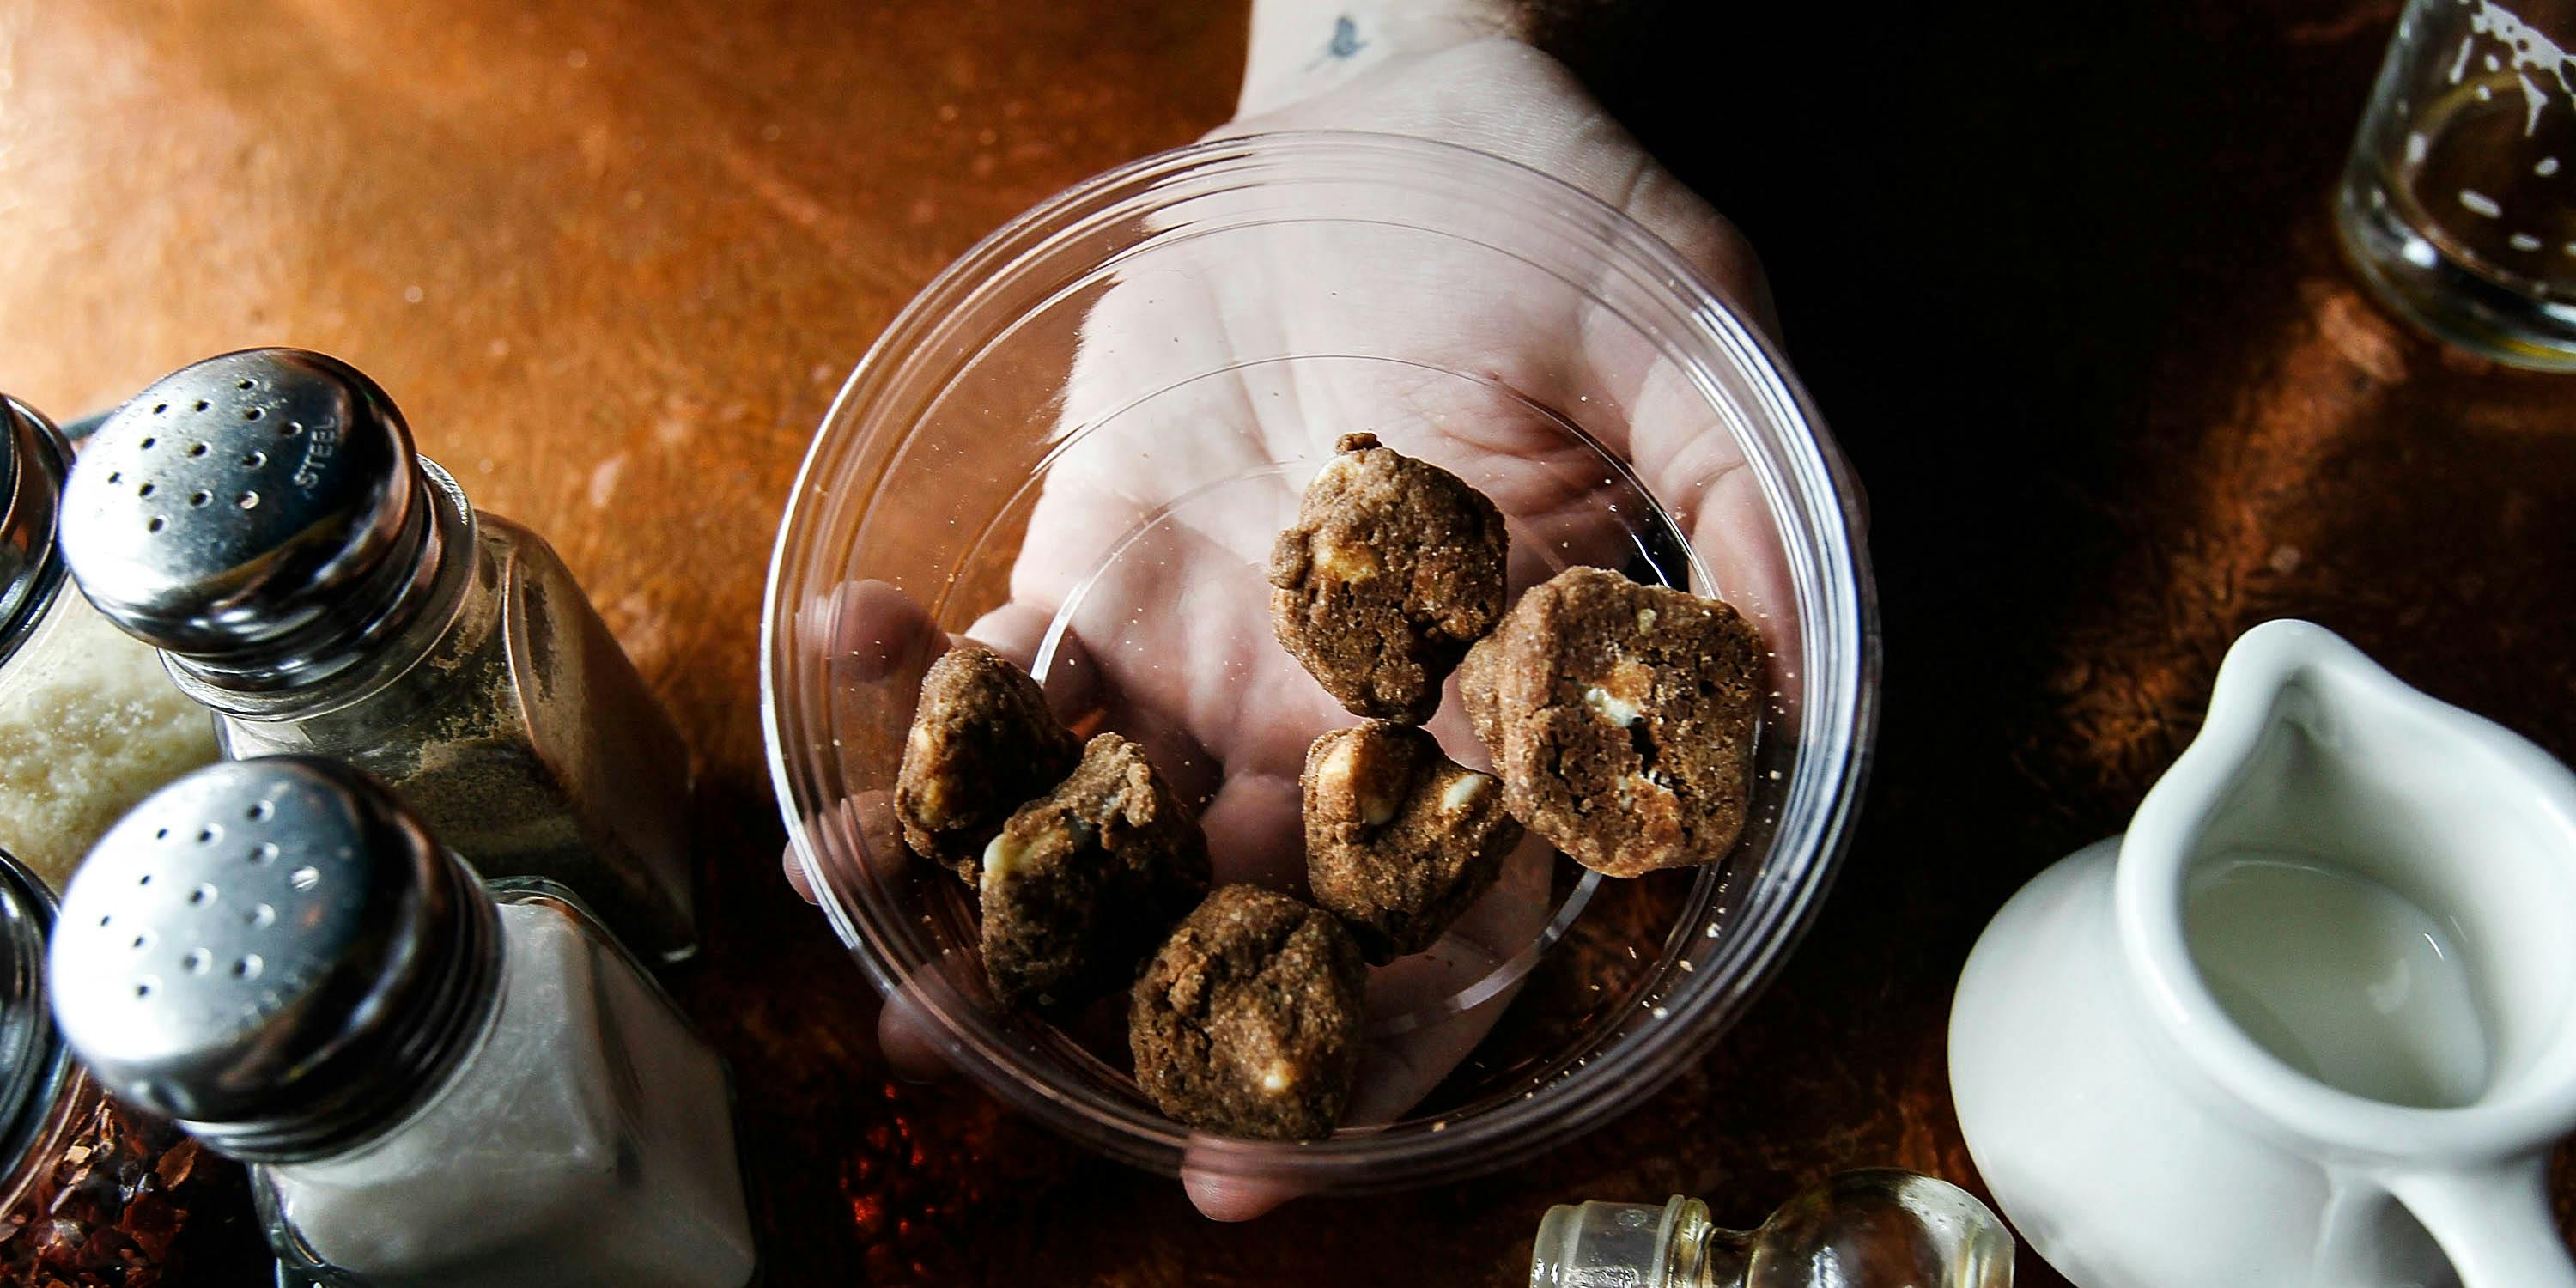 Marijuana-infused cookies called "Medibles" are displayed at the Cannabis Crown 2010 exp. According to a recent report by the CBC, potent edibles paired with poor public education have caused a spike in emergency room visits.